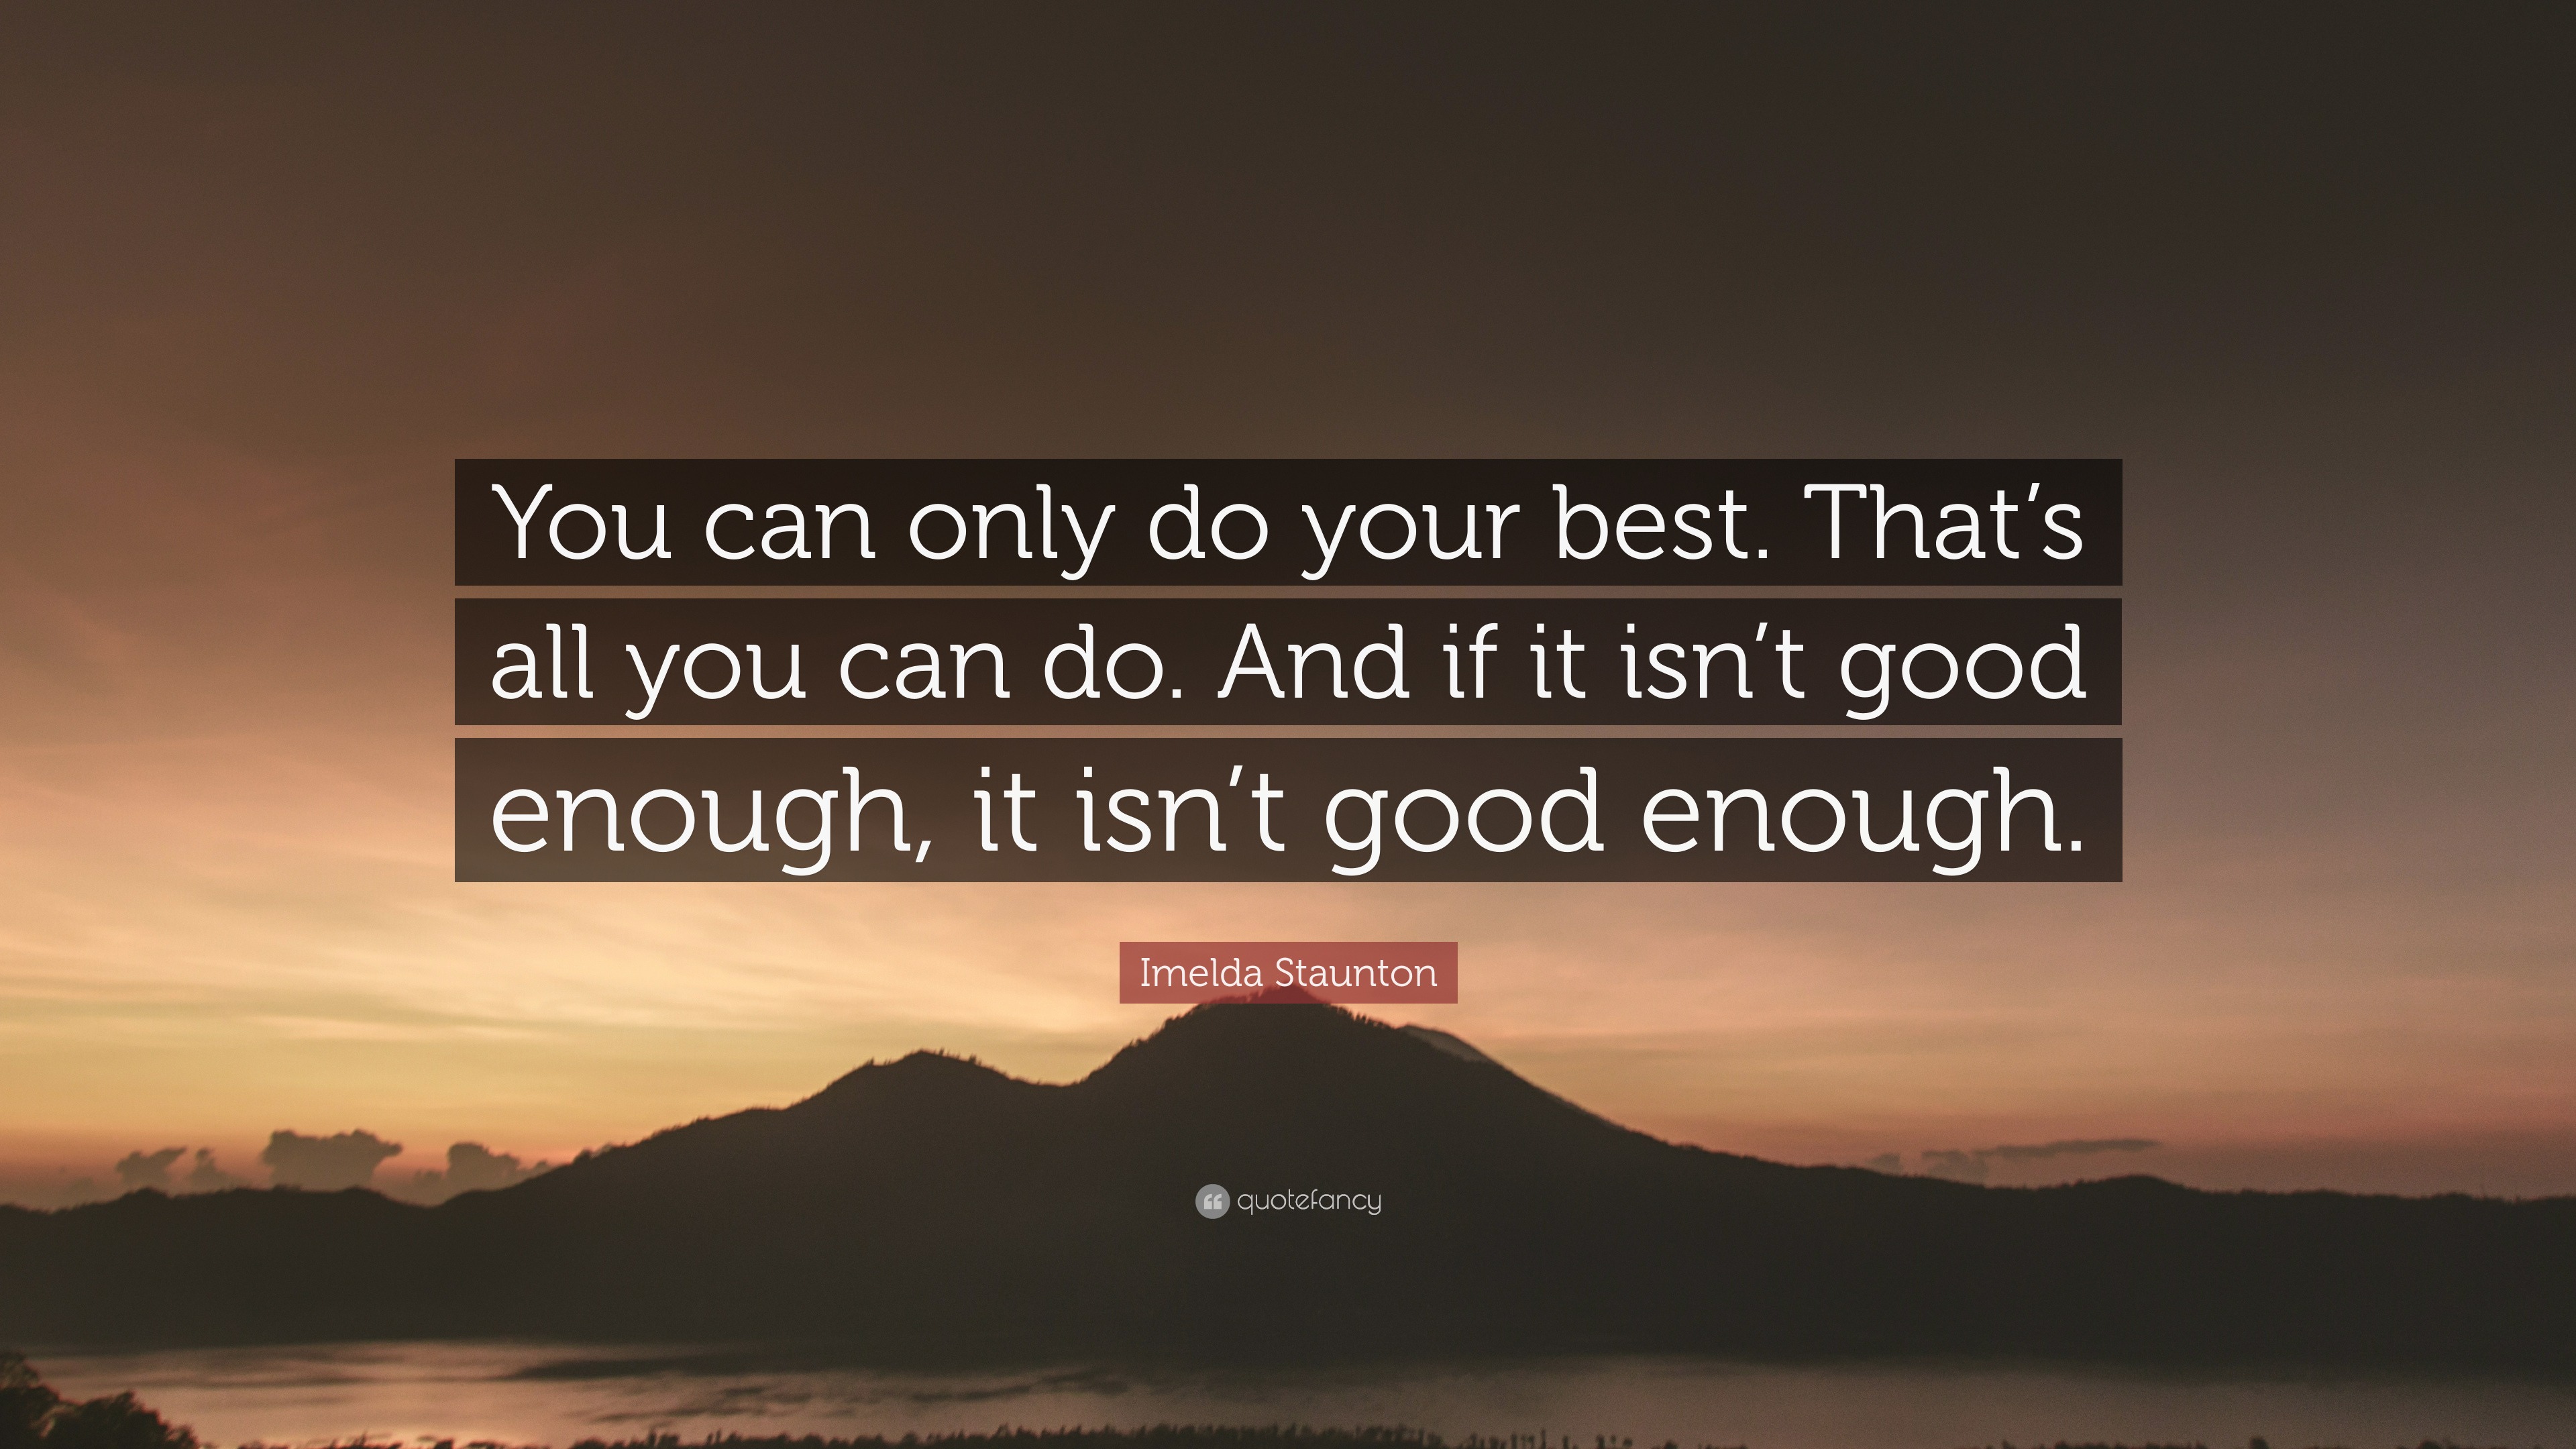 Imelda Staunton Quote You Can Only Do Your Best That S All You Can Do And If It Isn T Good Enough It Isn T Good Enough 9 Wallpapers Quotefancy